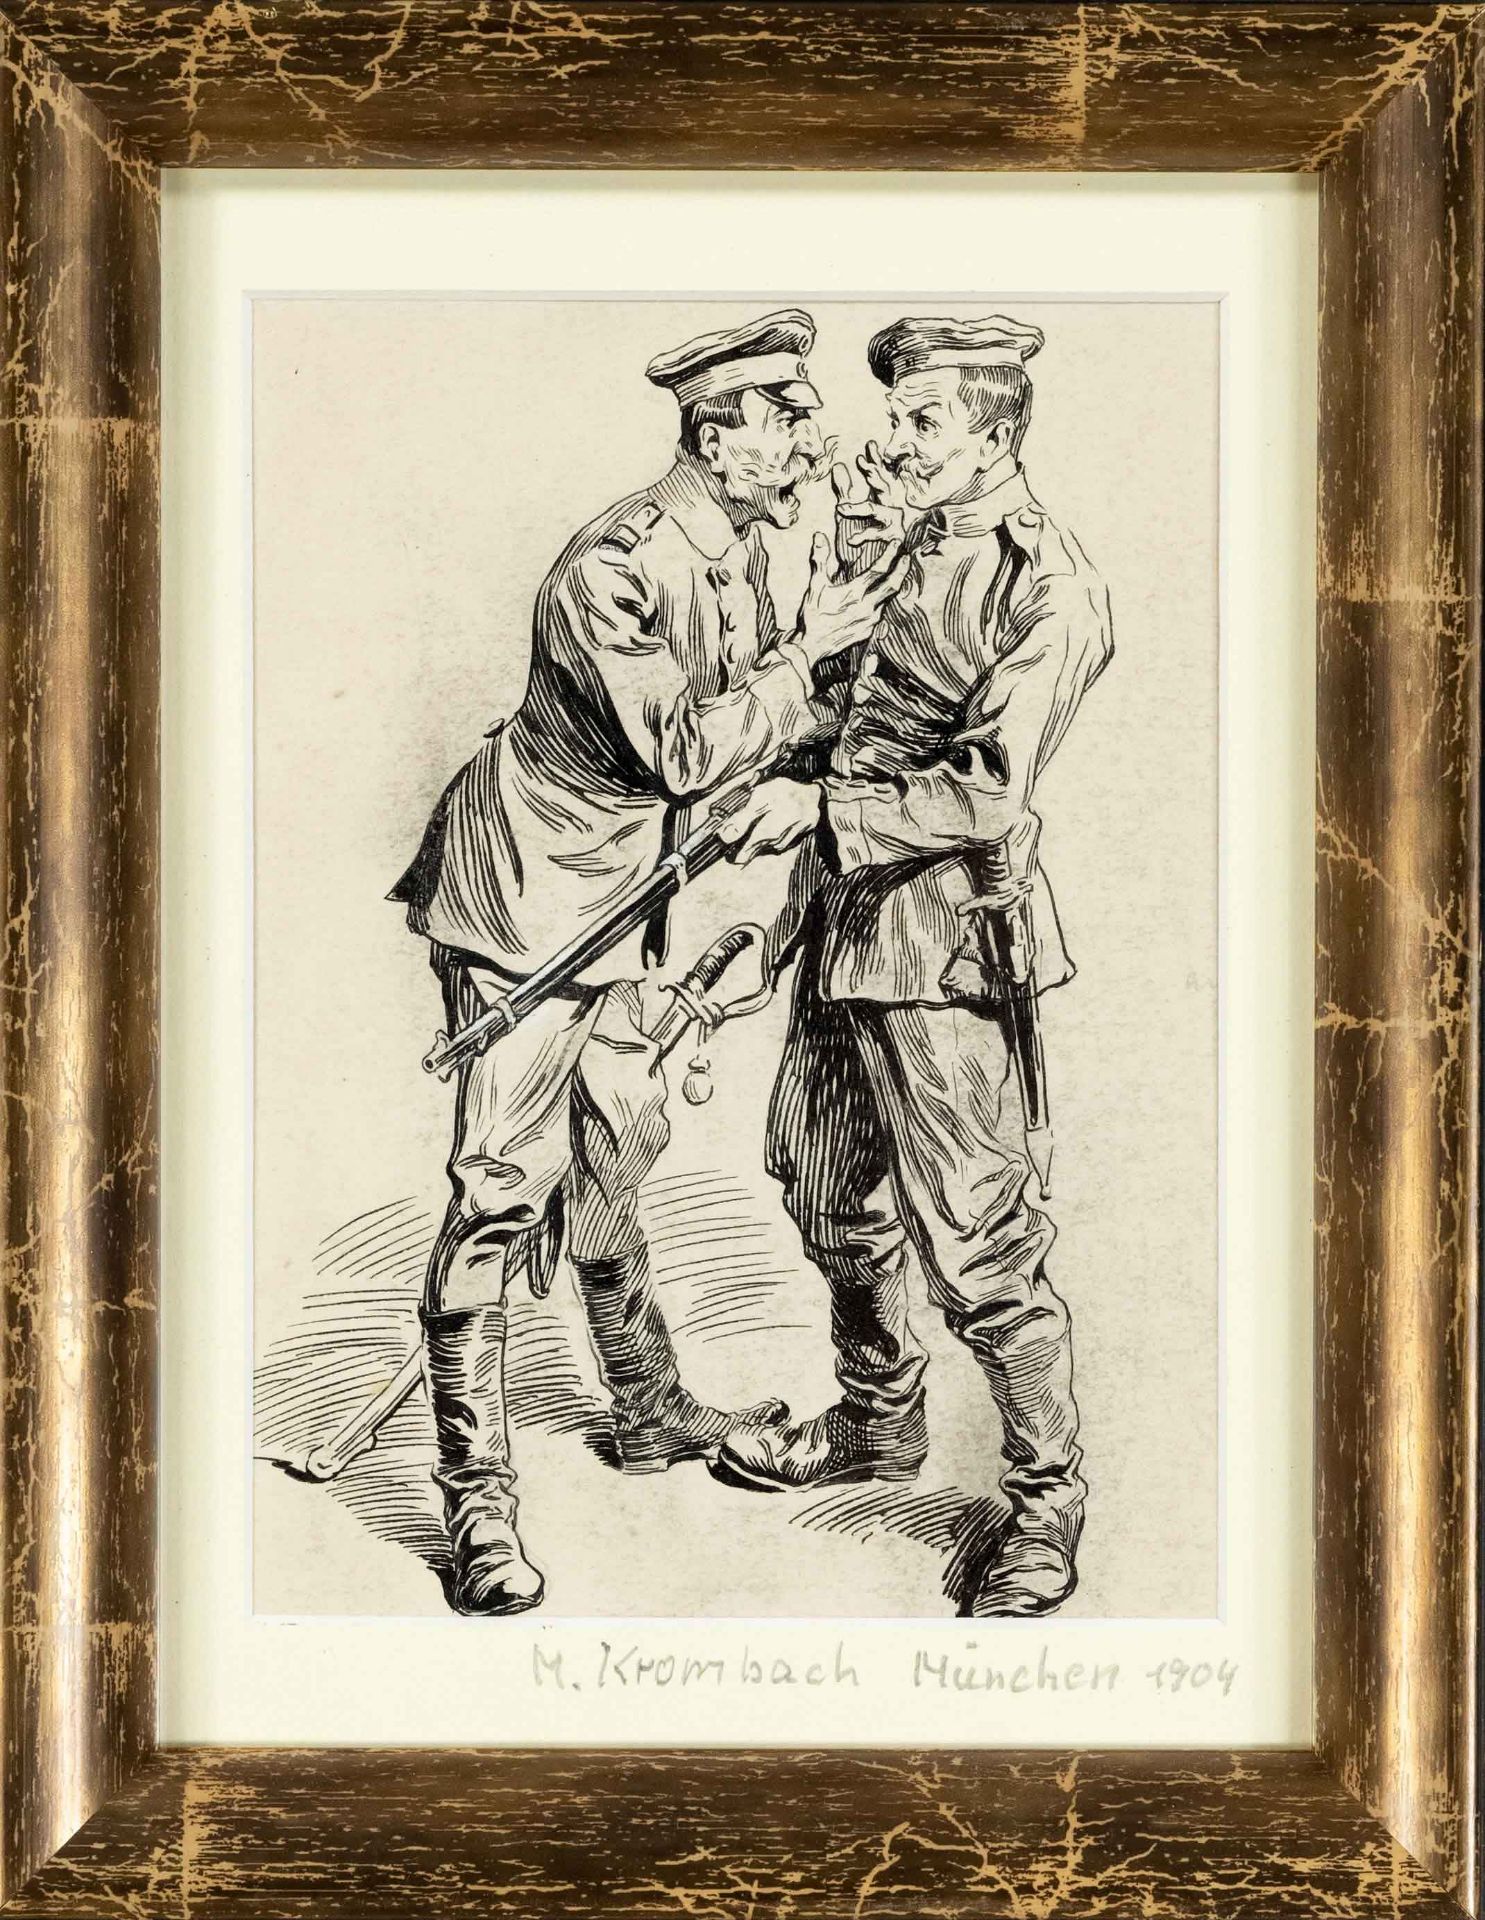 Max Krombach (1867-1947), two soldiers fighting, pen and ink drawing on paper, unsigned, inscribed